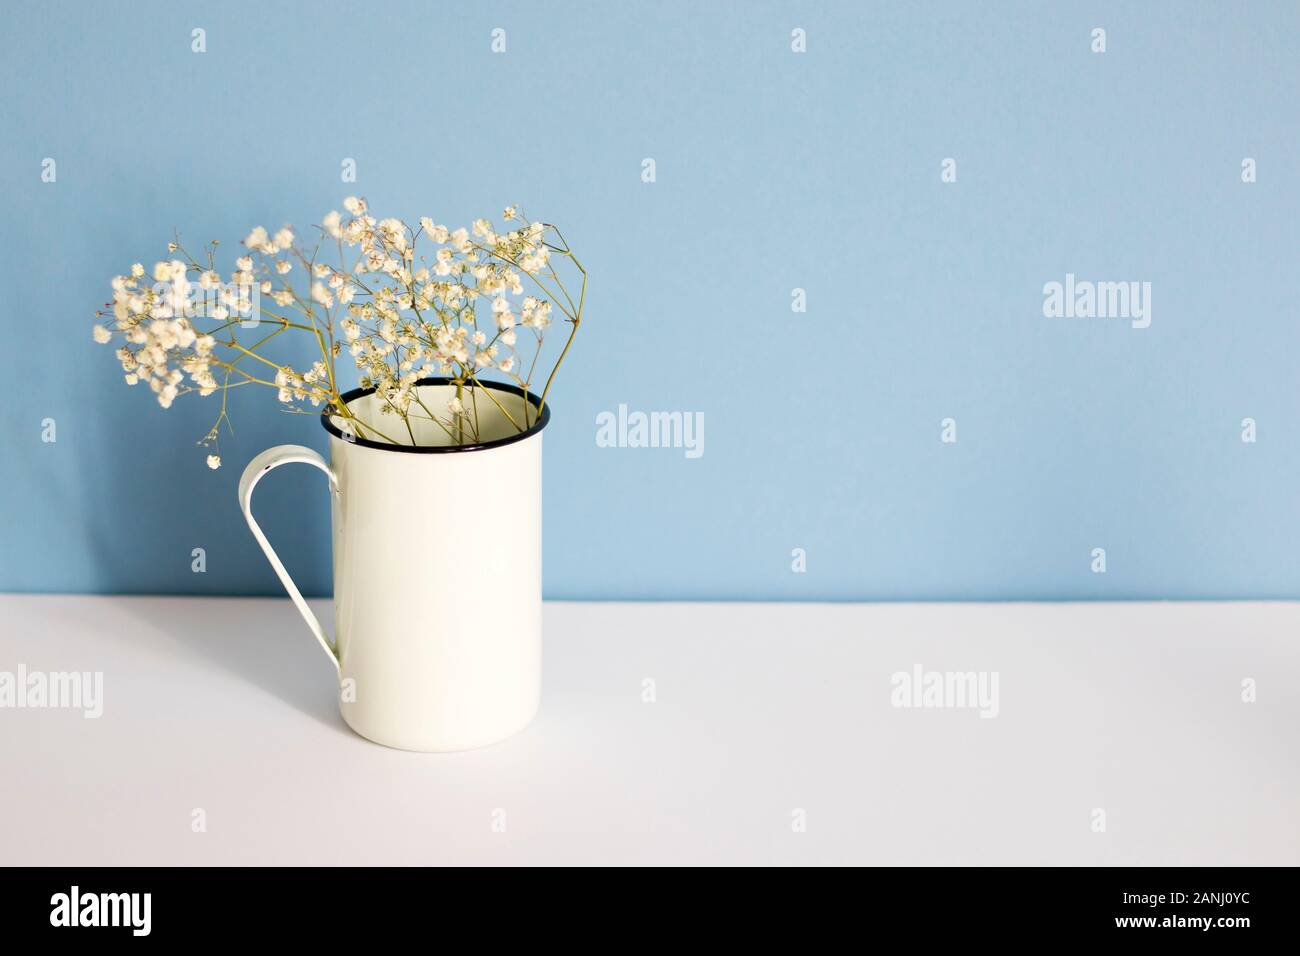 Dried gypsophila in a white enameled high mug on a white and blue background. Copy space Stock Photo